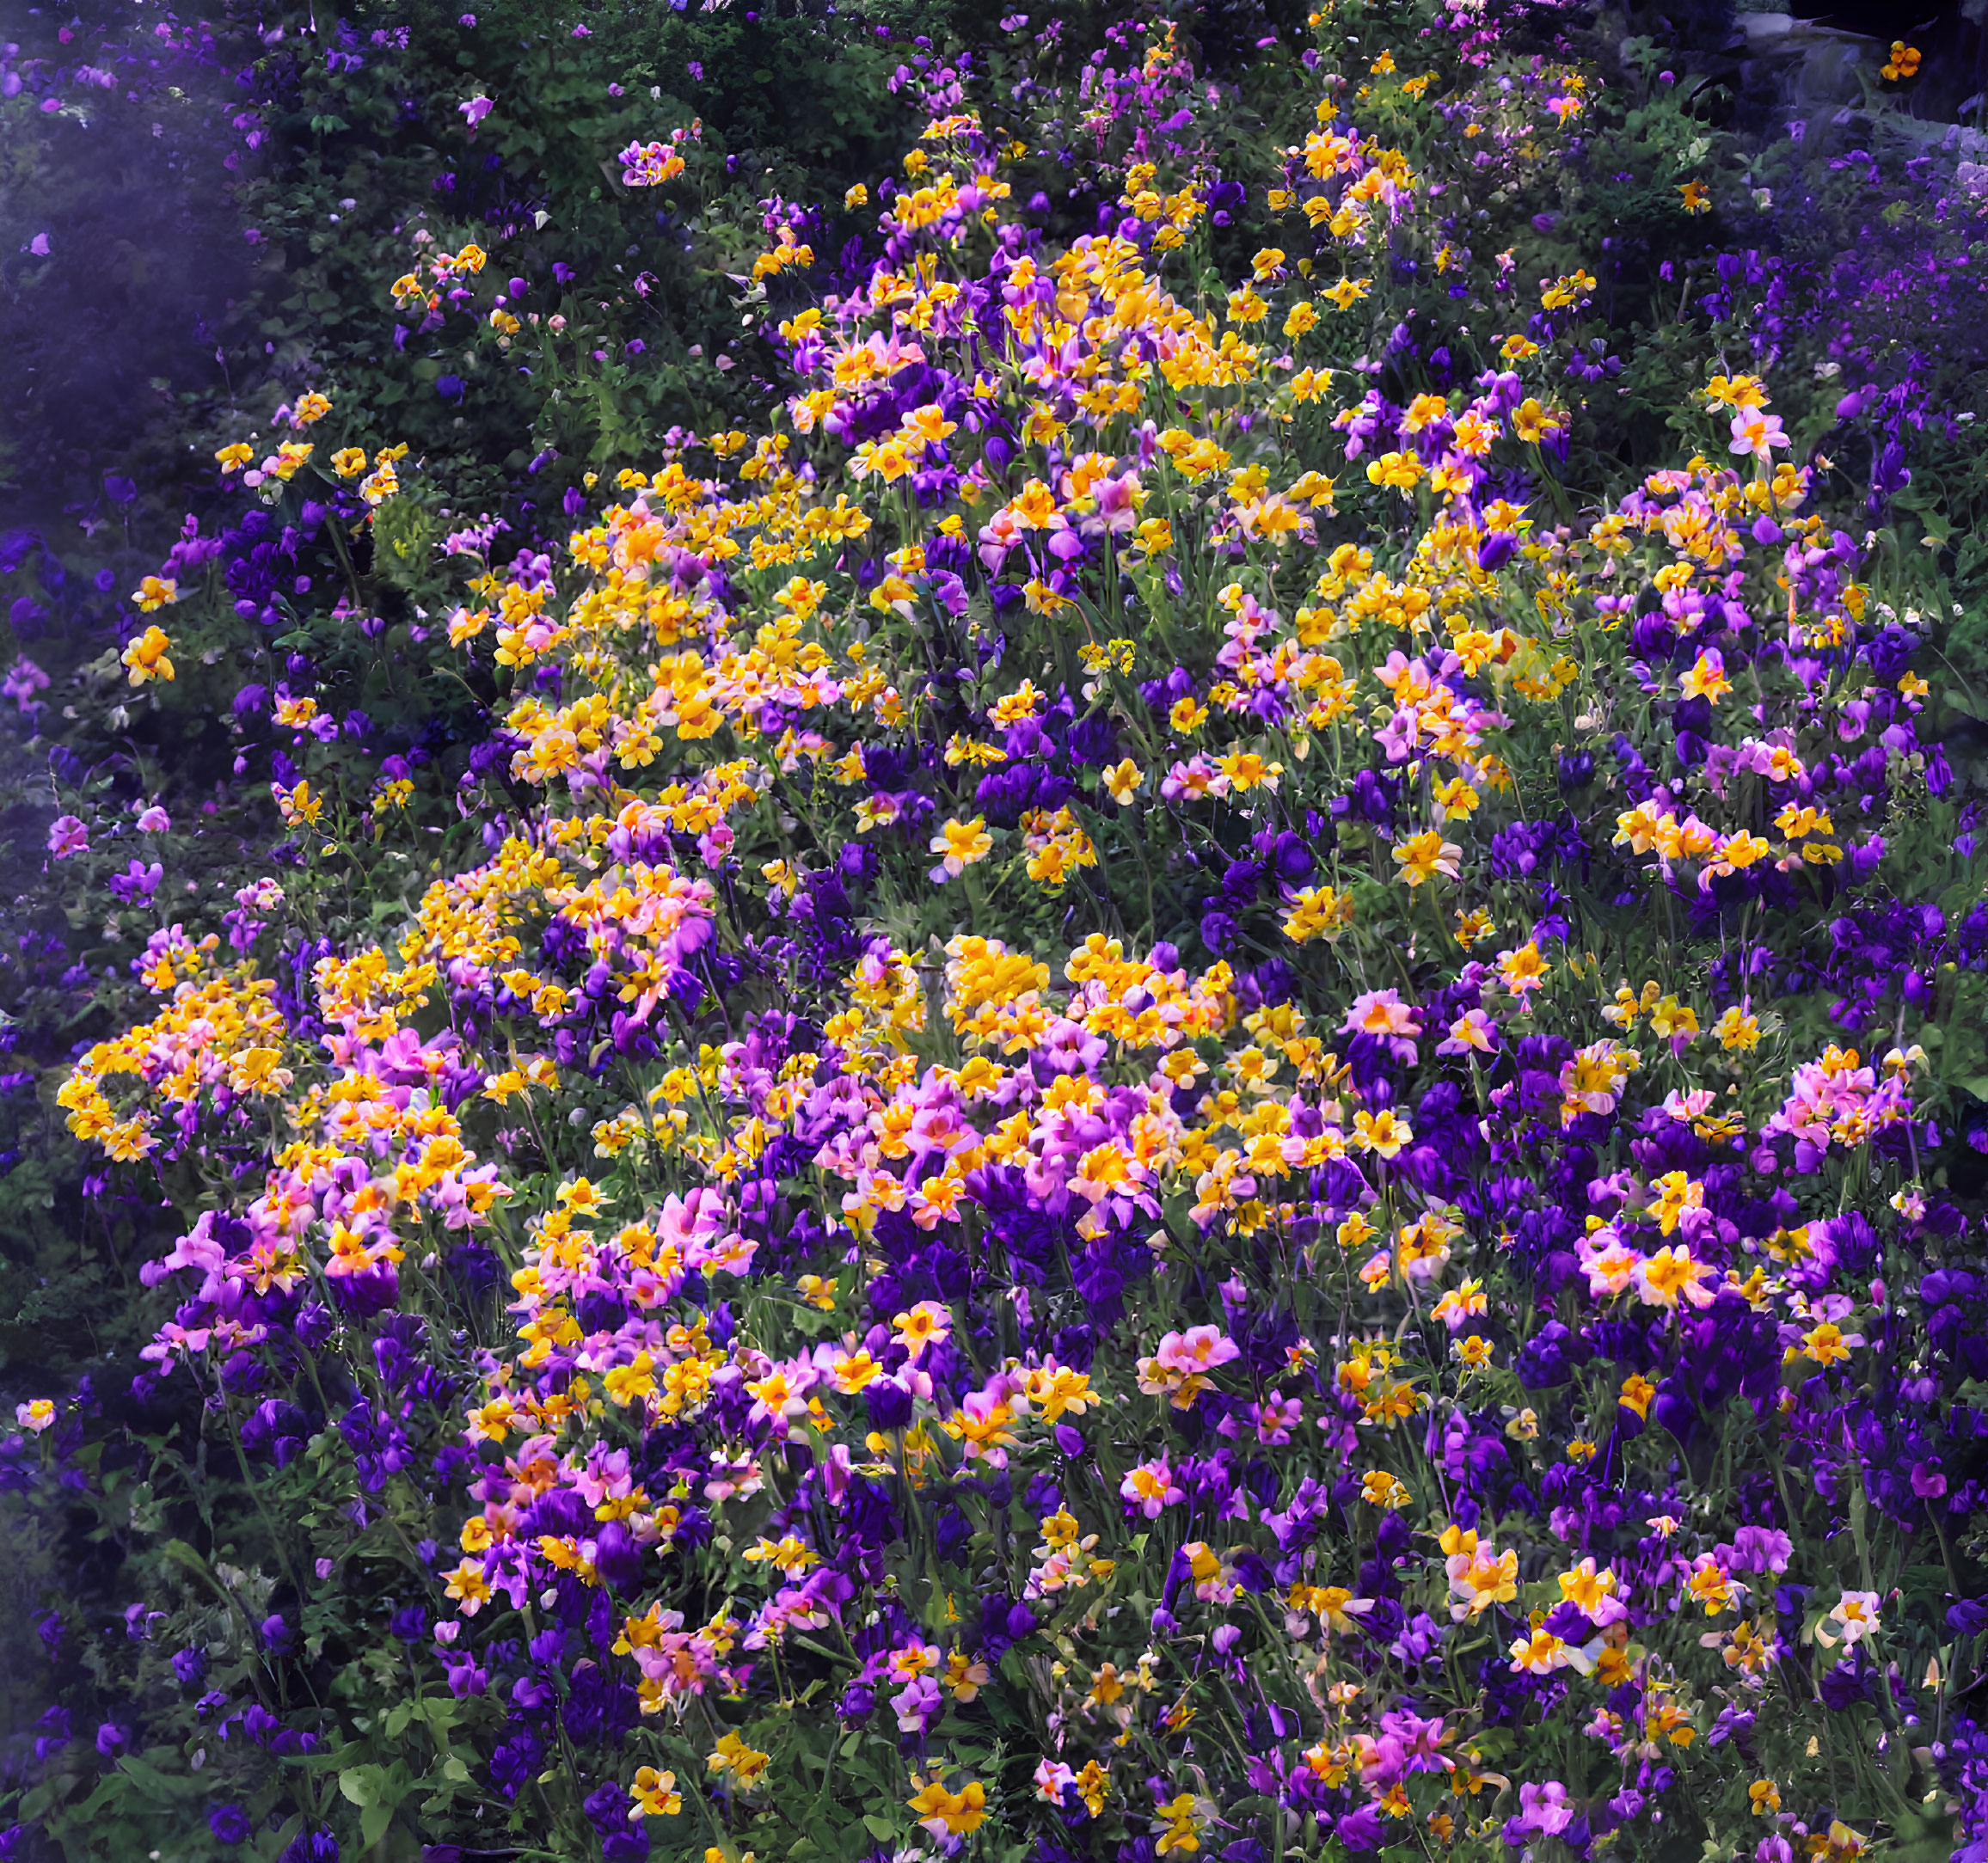 Colorful Purple and Yellow Flower Garden in Spring